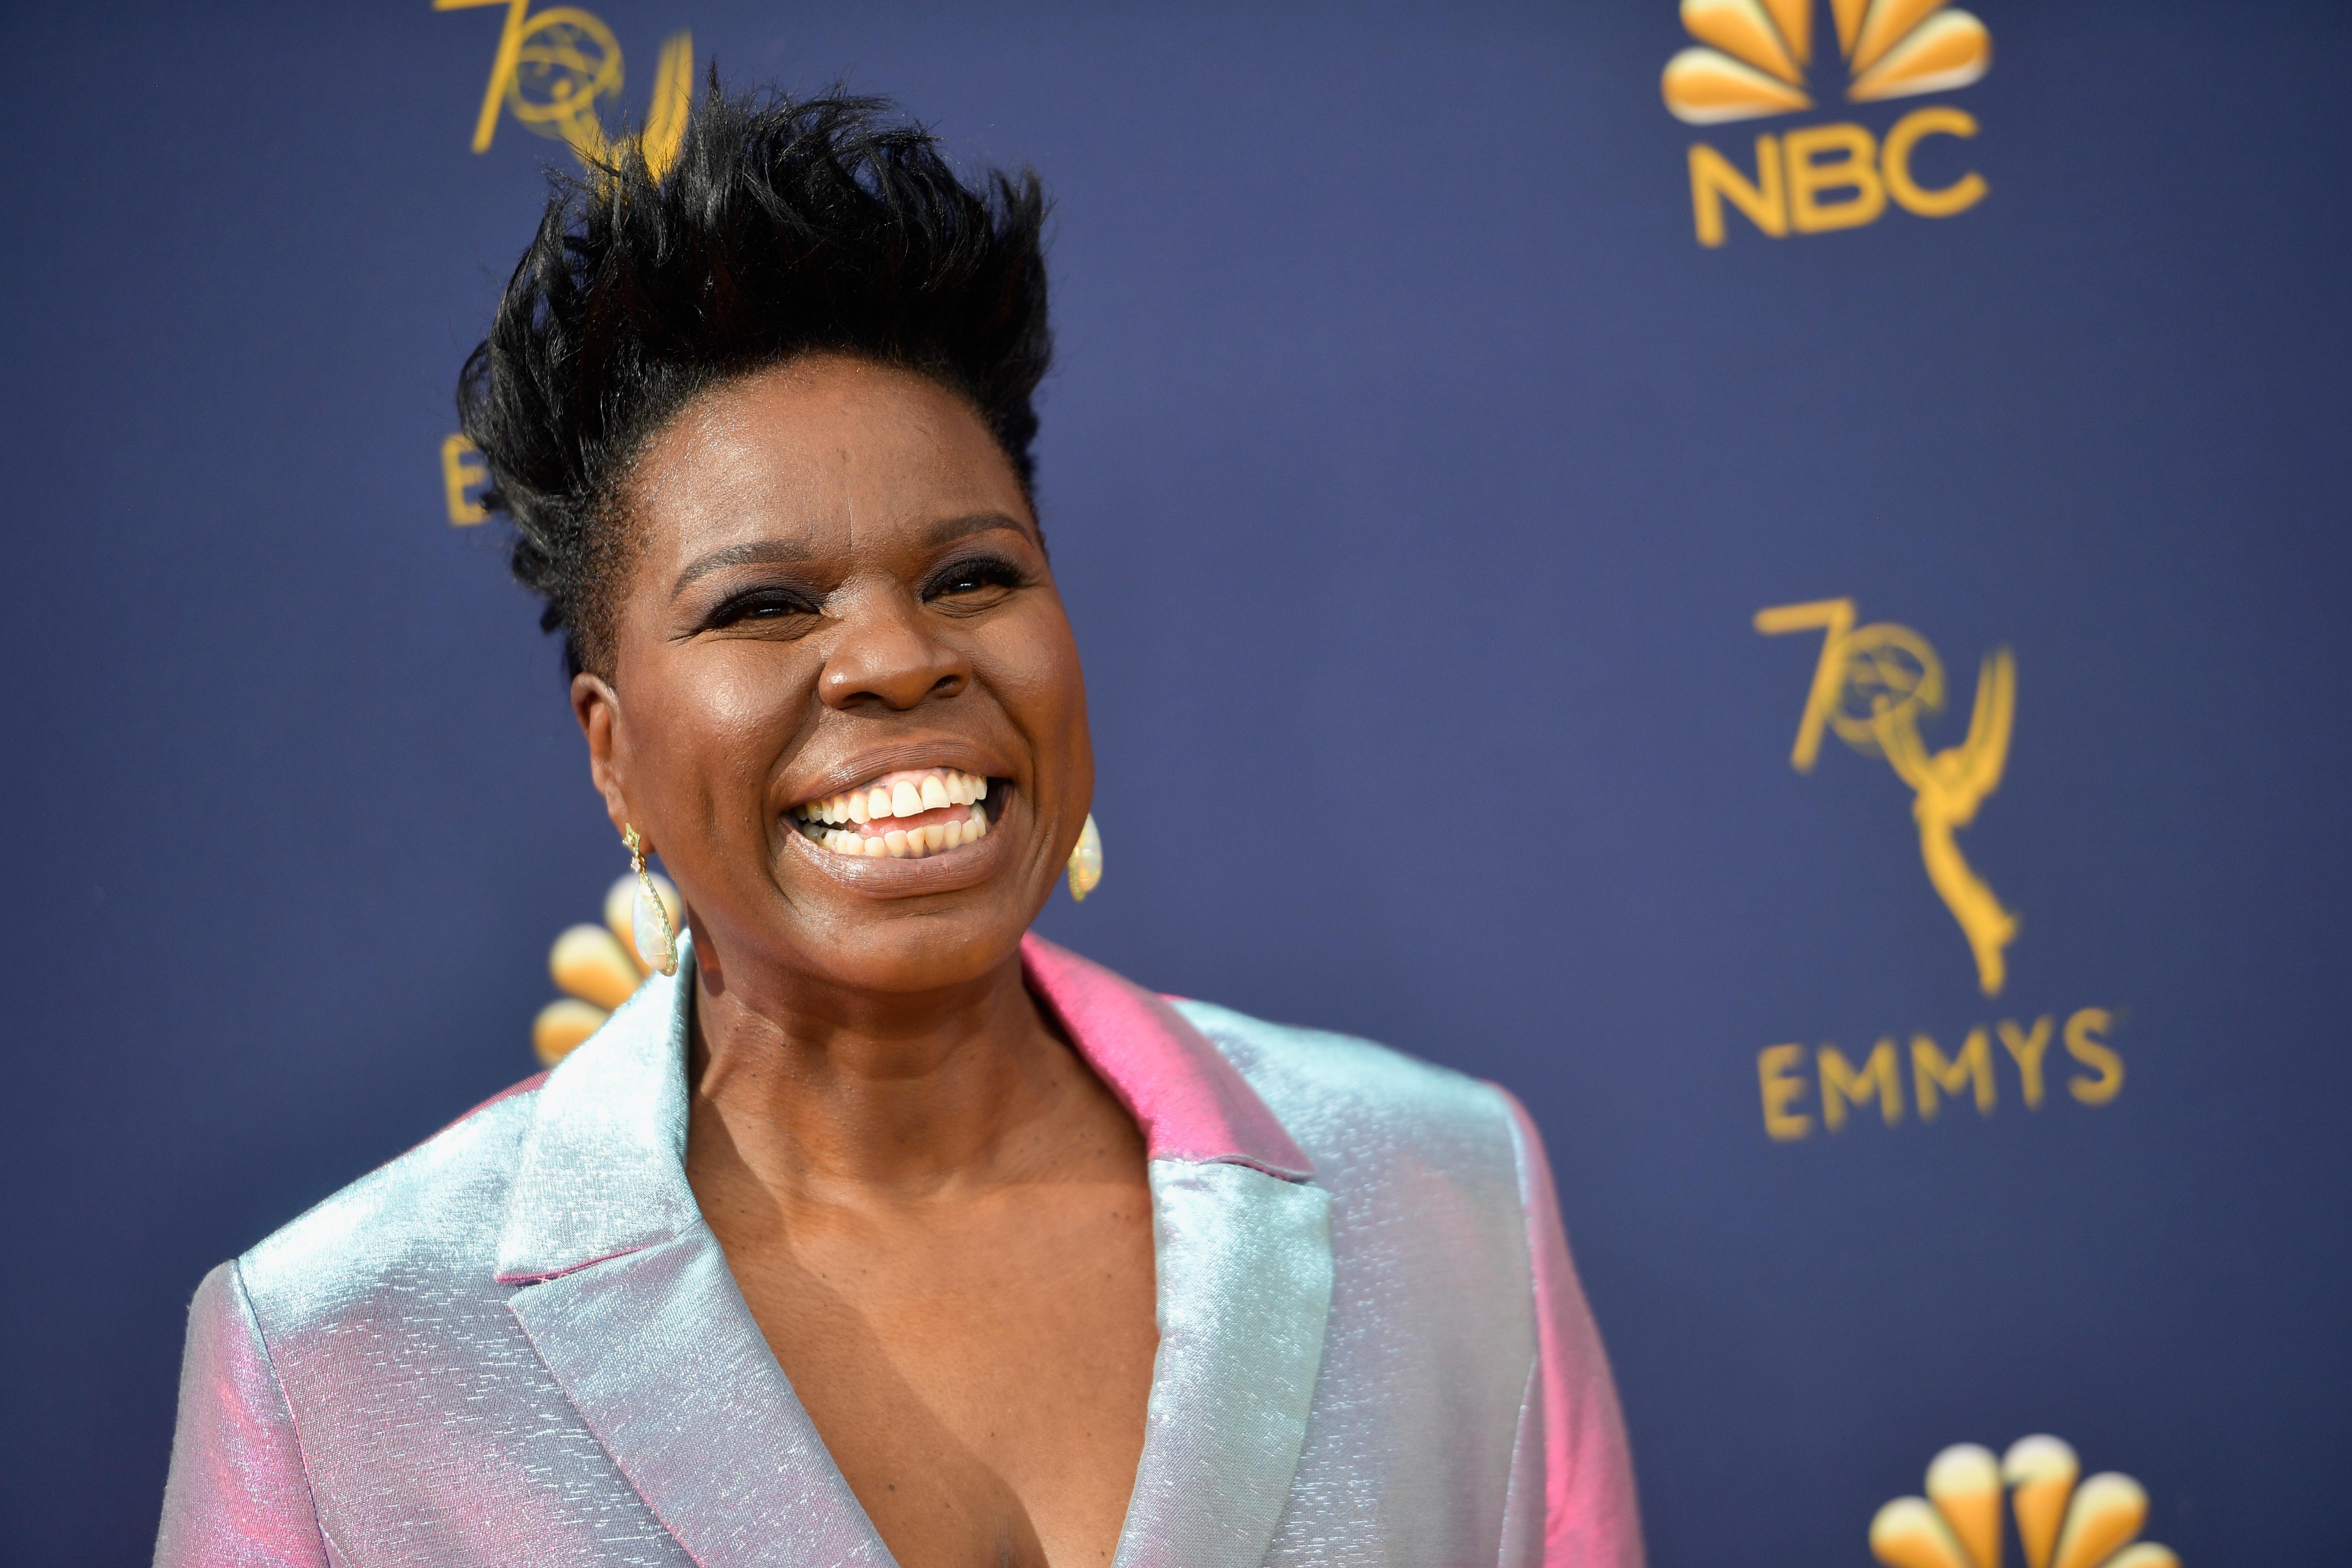 Leslie Jones smiles on the Emmy's red carpet, wearing an iridescent silver suit.